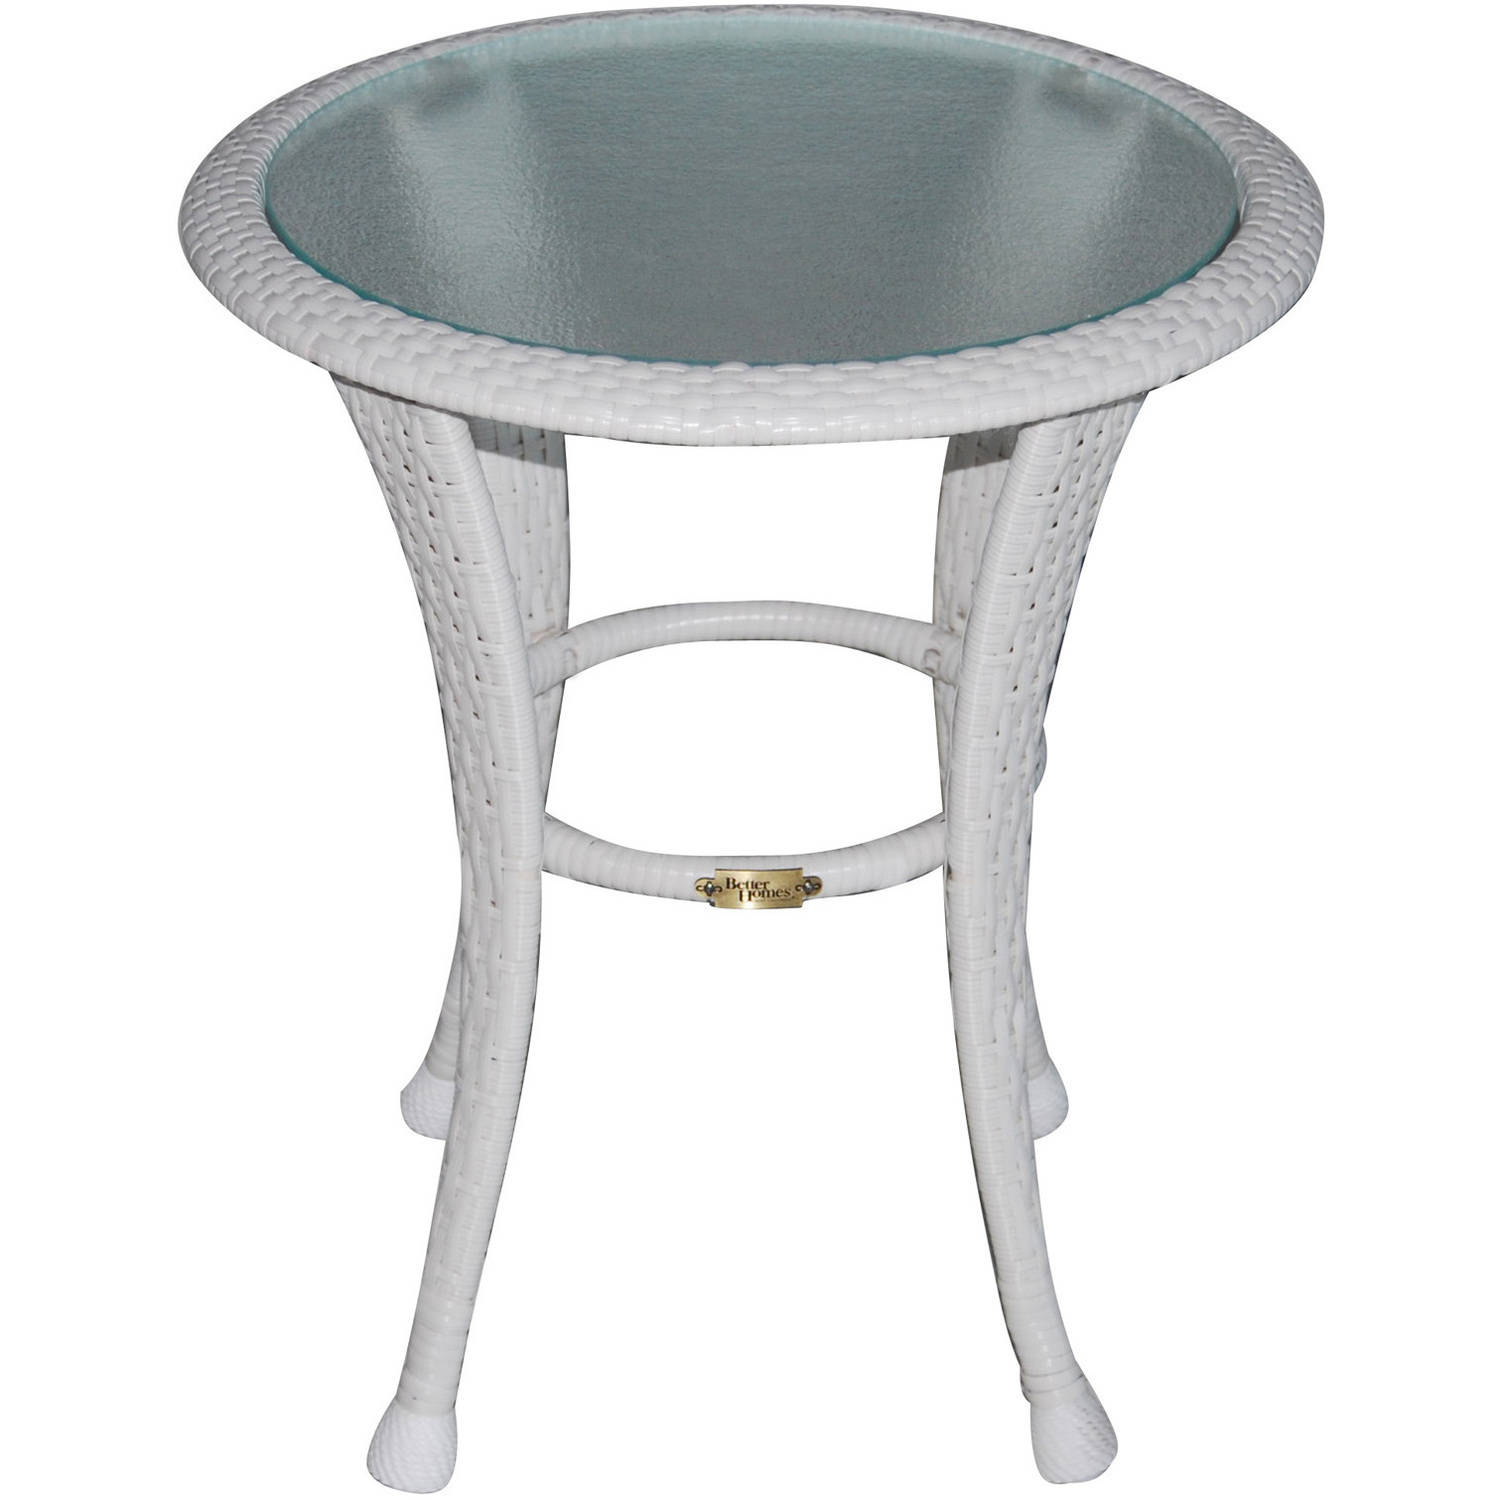 better homes and gardens azalea ridge round outdoor side table wicker patio accent living room cabinets white linen placemats inexpensive chairs bar height retro dining pottery